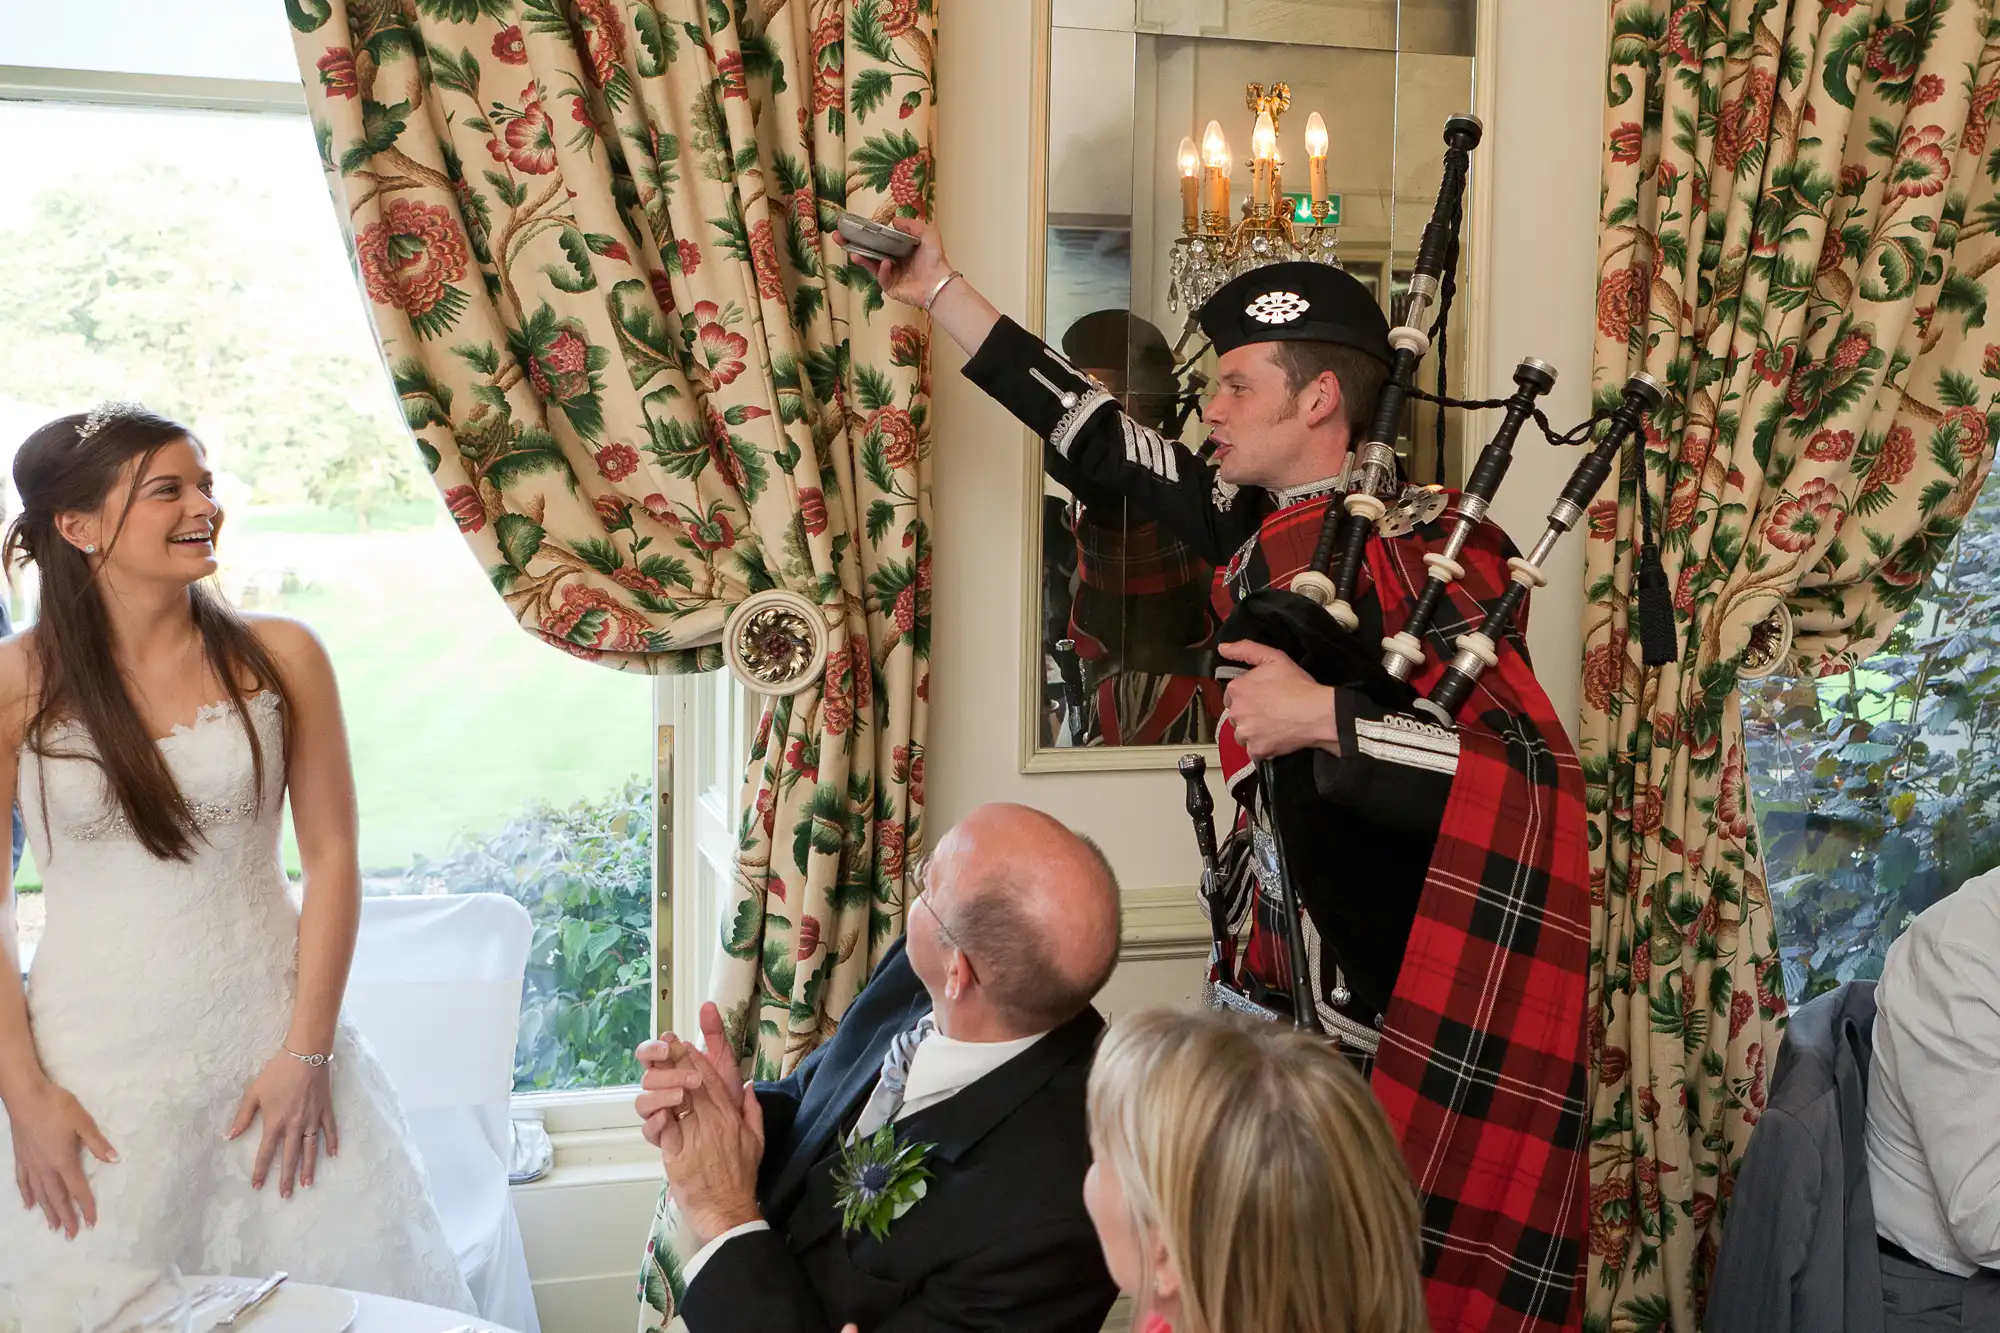 A bride laughs as a bagpiper in traditional scottish attire plays indoors by a window during a wedding reception.